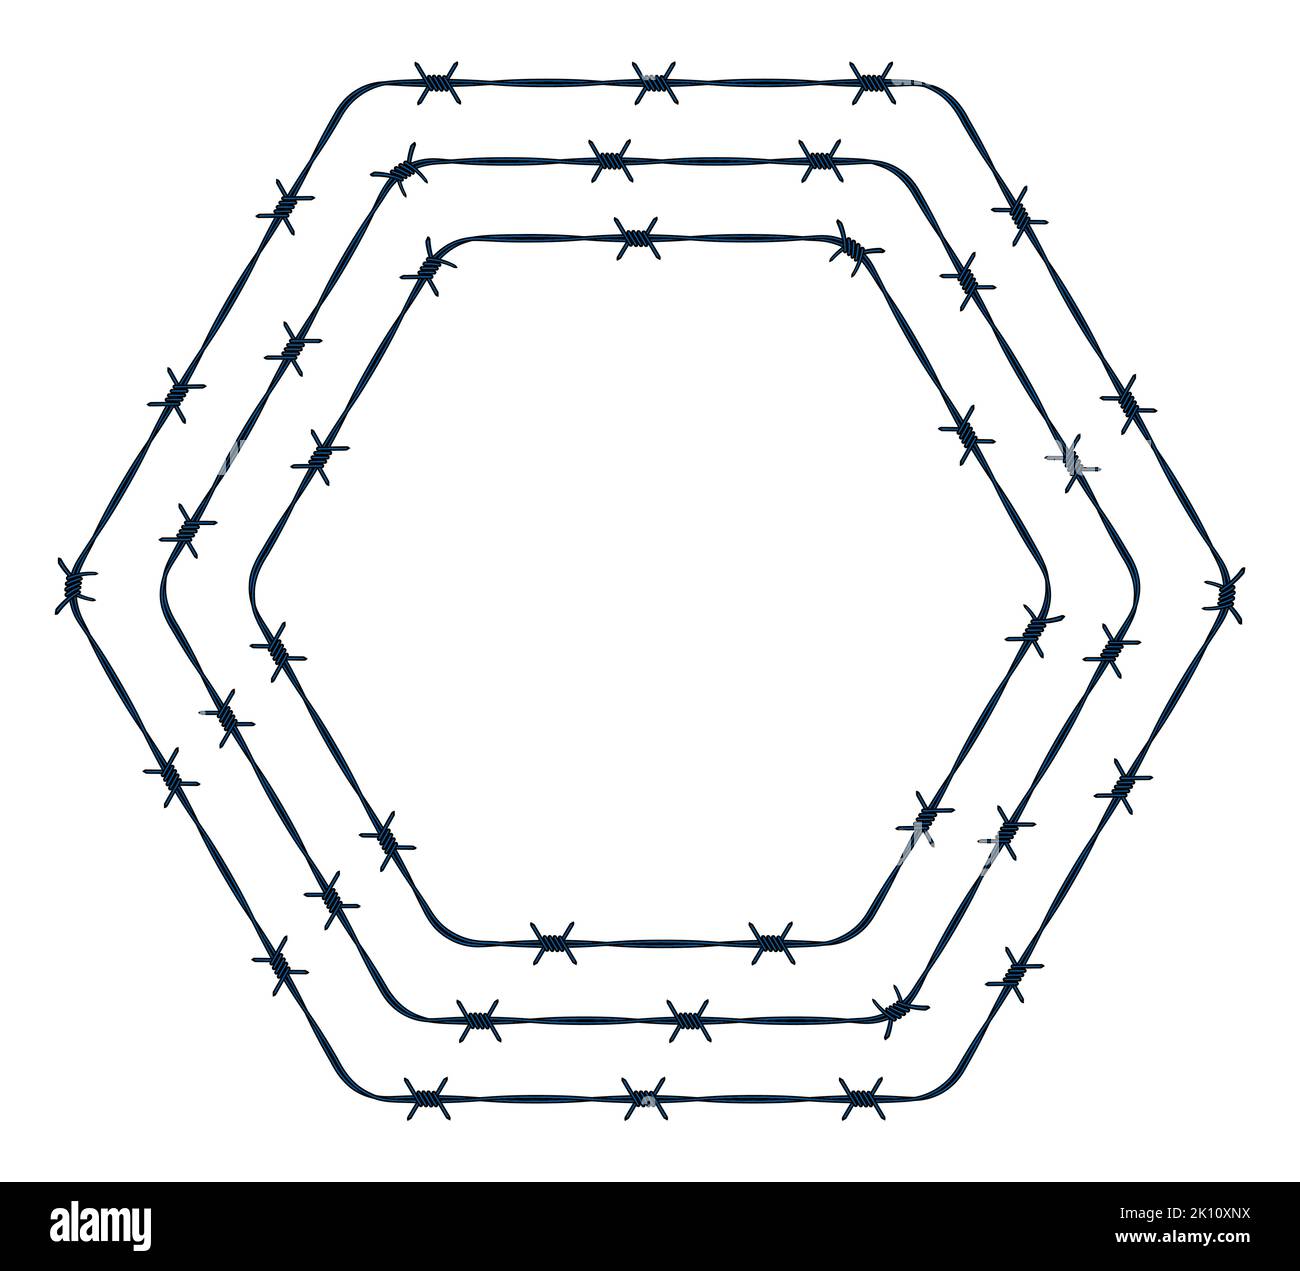 Illustration of the abstract barbed wire hexagons Stock Vector